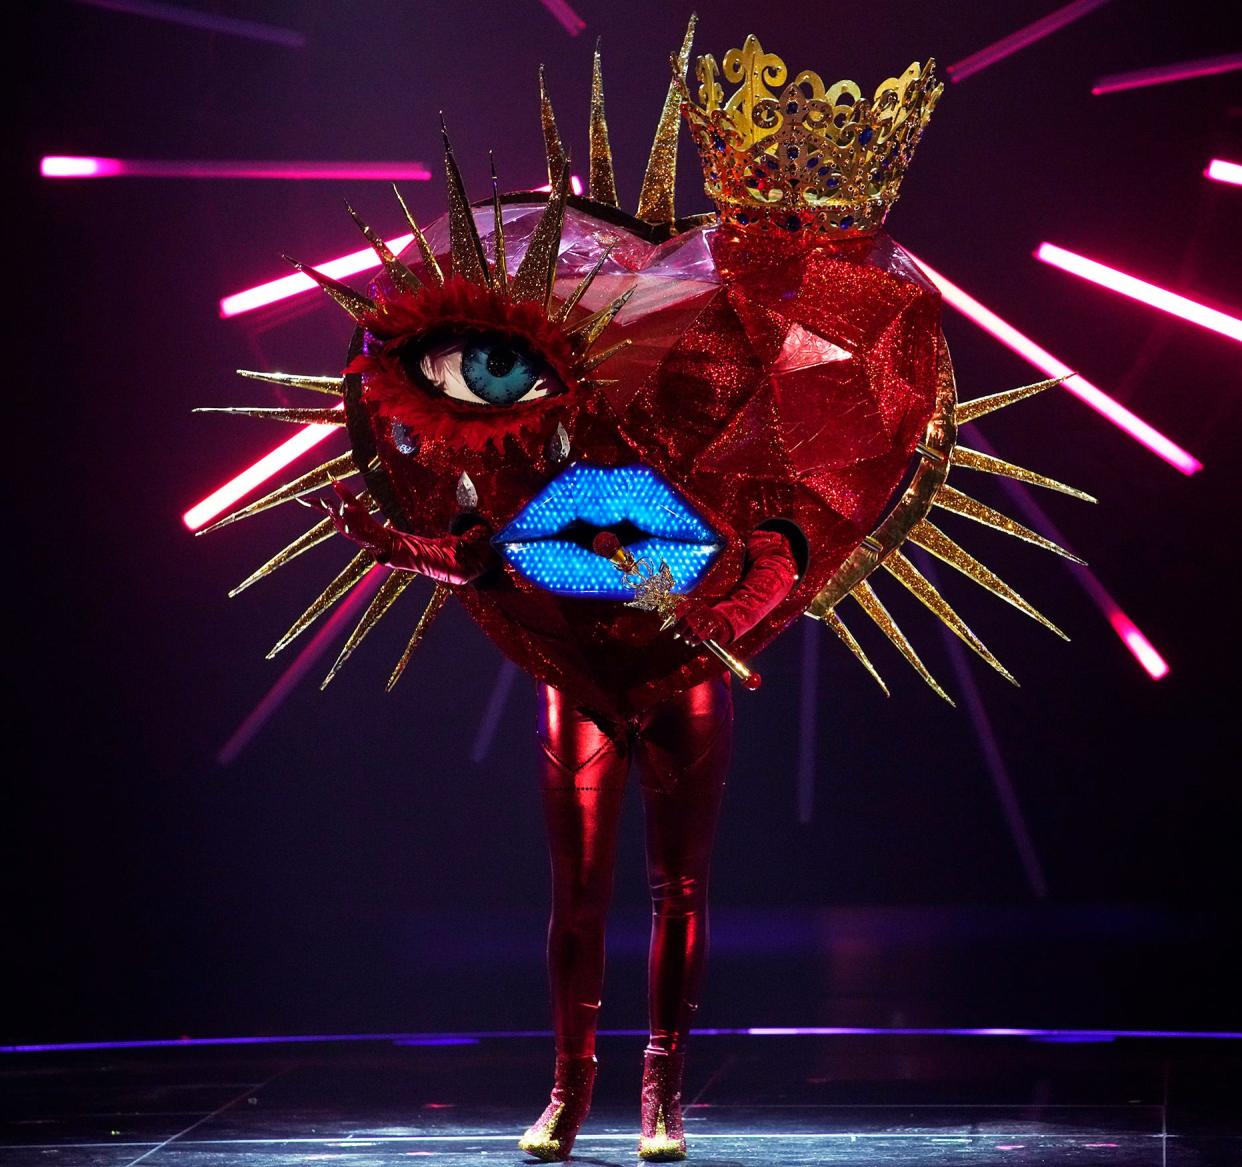 The popular Queen of Hearts character from Season 6 of "The Masked Singer" will be part of the Masked Singer National Tour, which comes to Columbus on June 8.